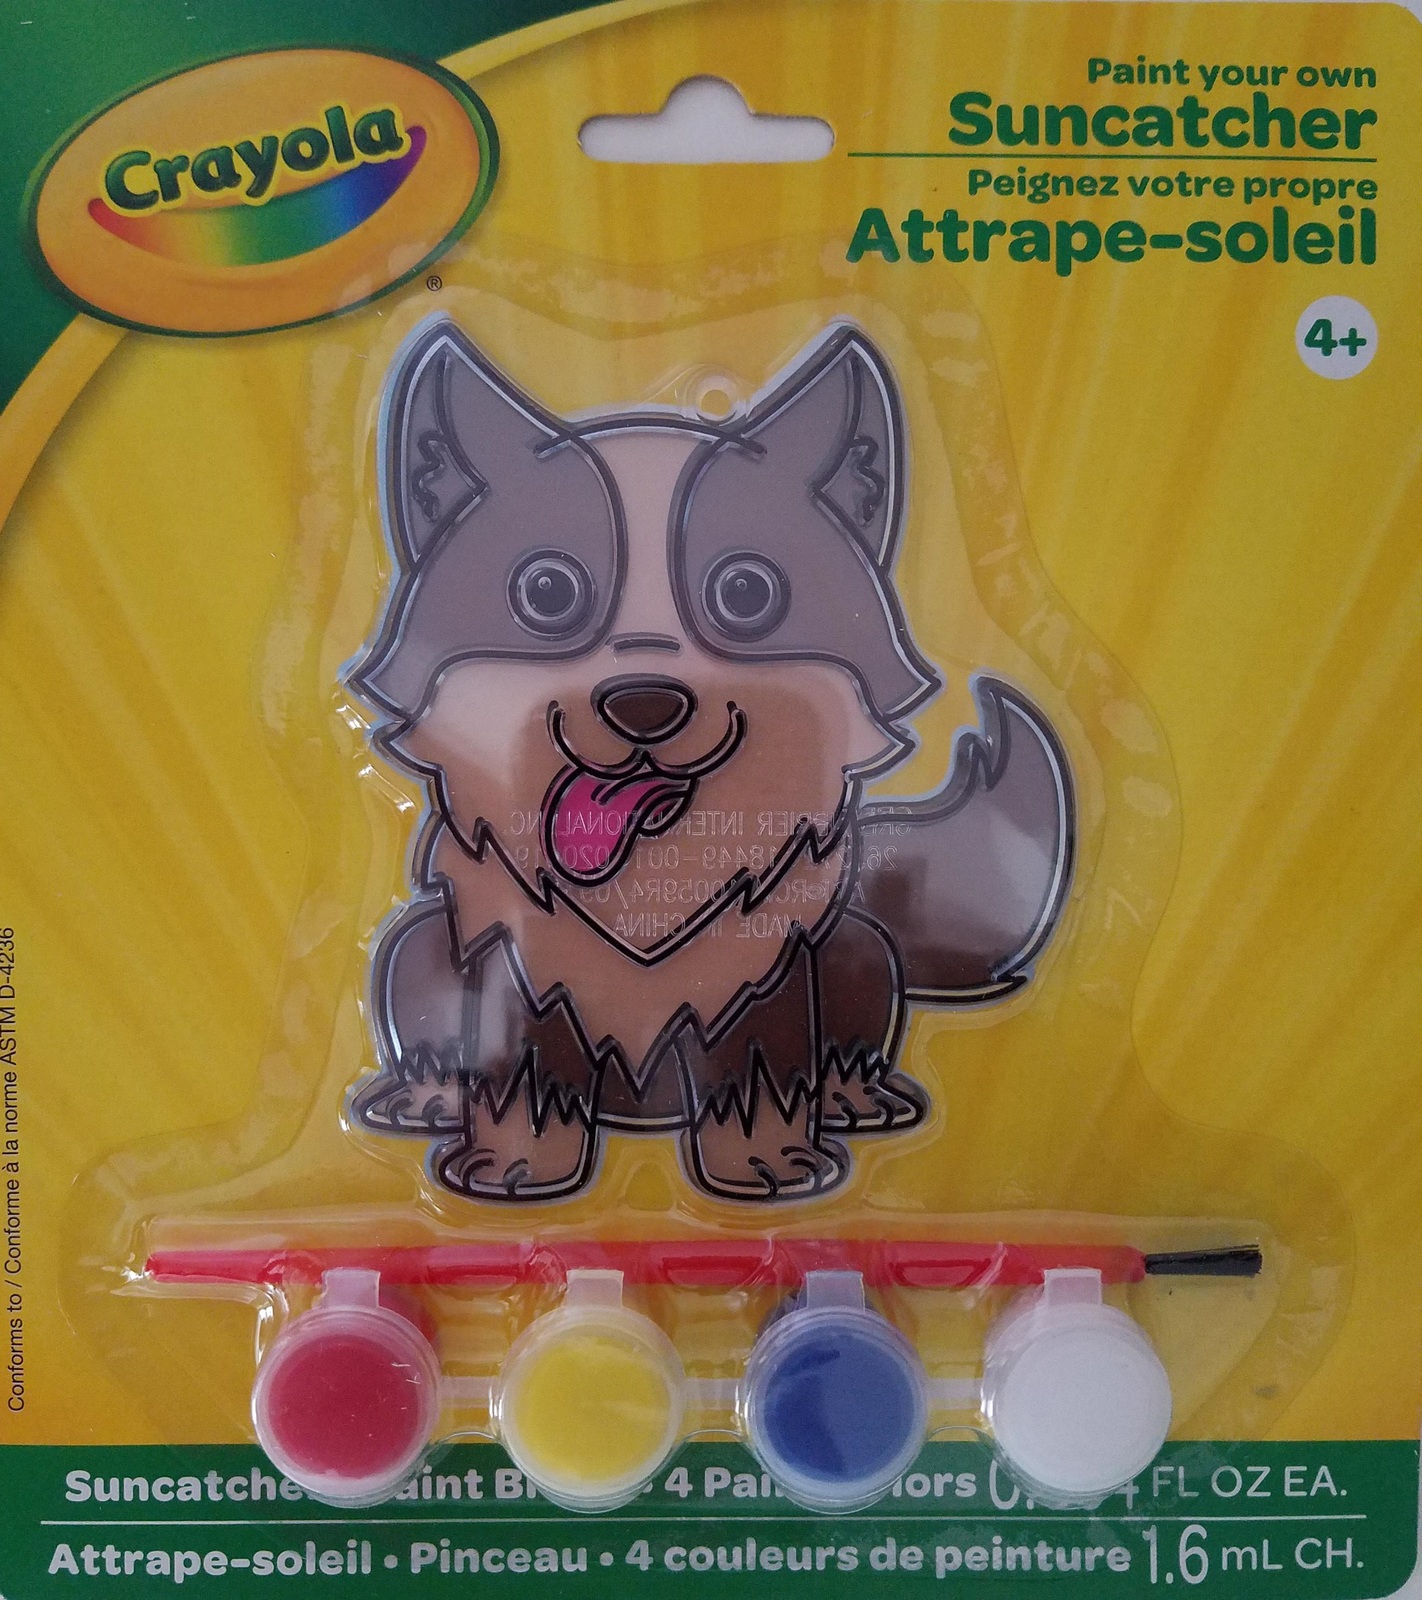 Painting Crayola Suncatcher and show a bit of my drawings